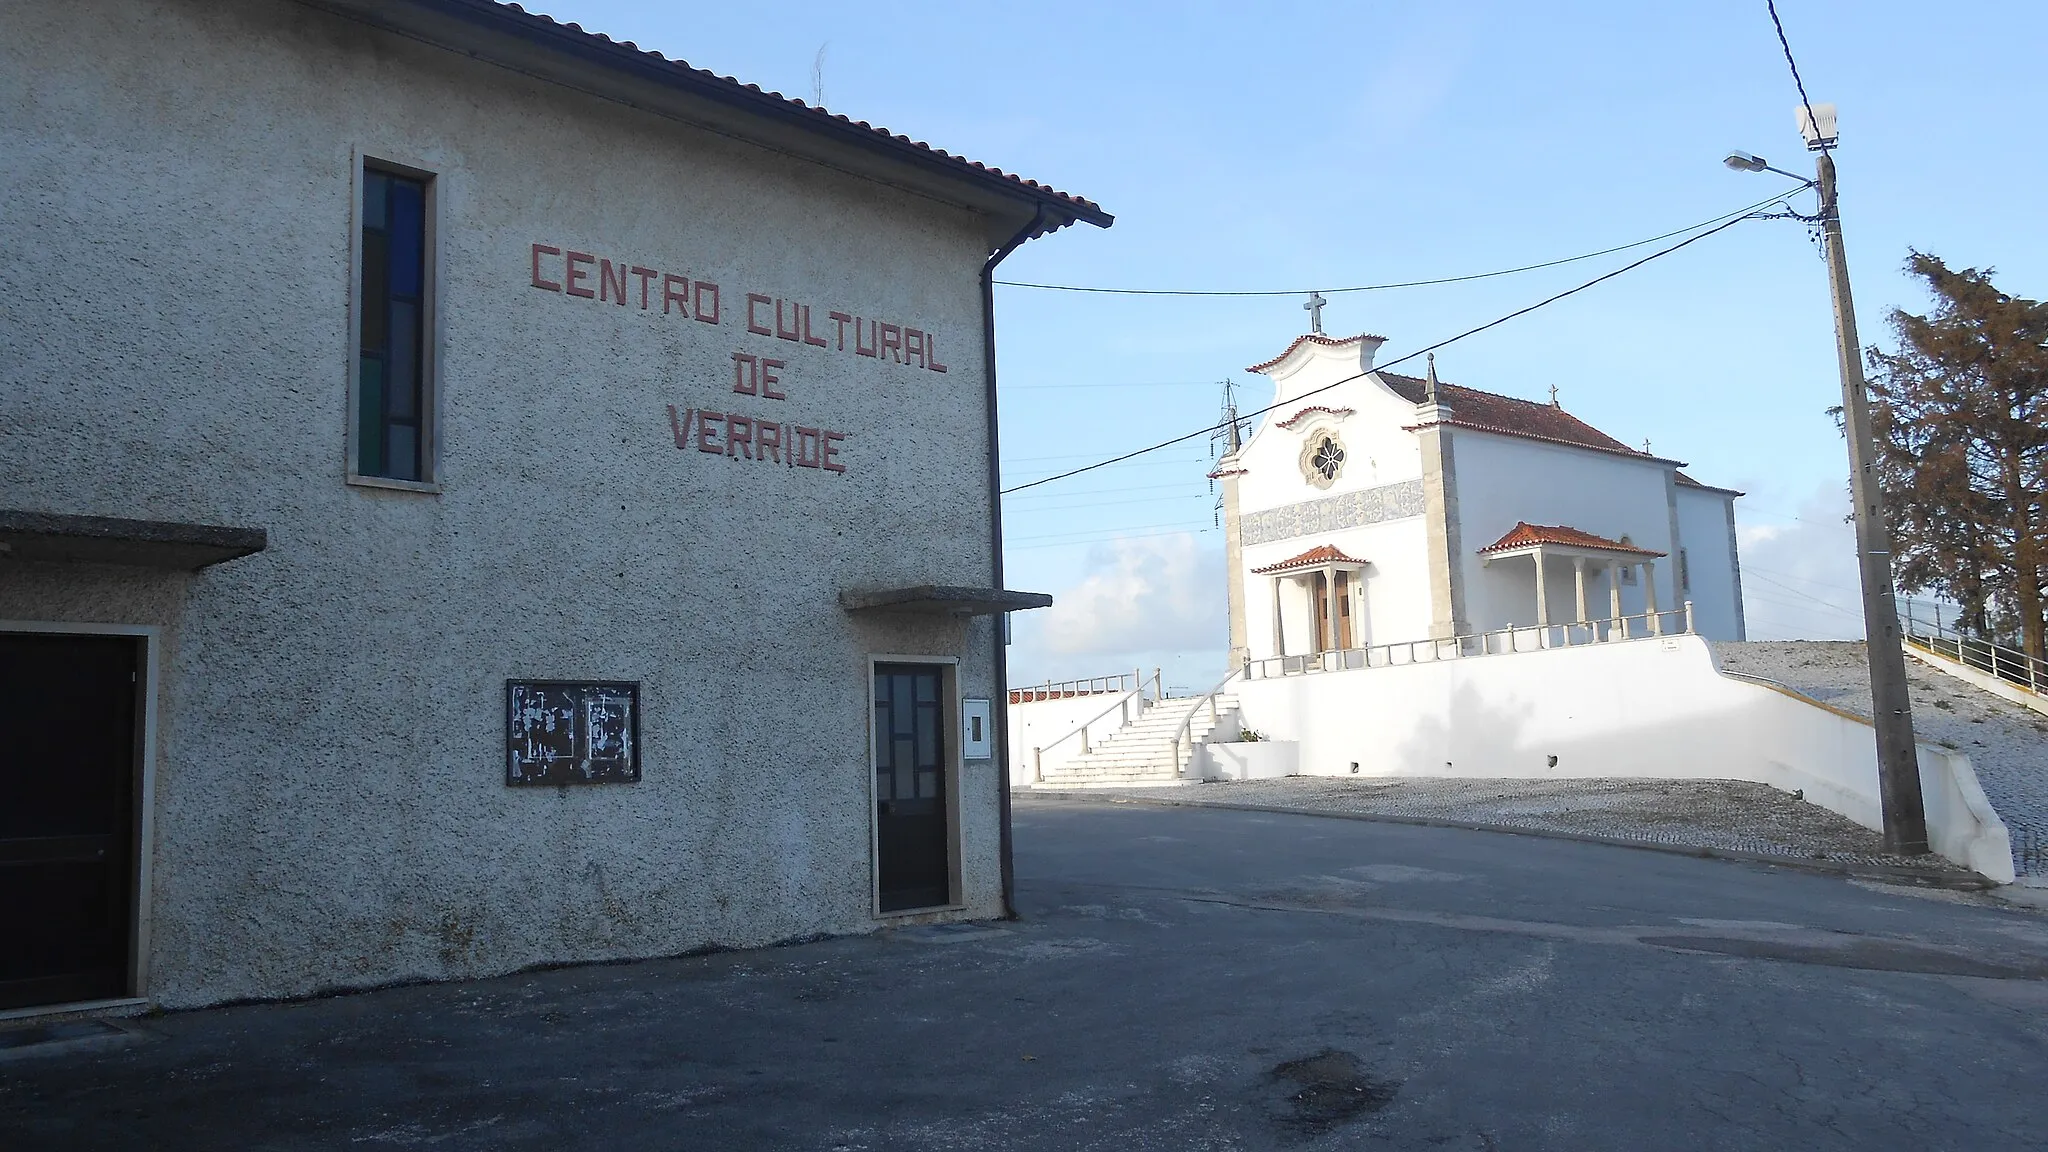 Photo showing: In the back the chapel "Capela de São Sebastião", 16. century. In the front on the left, the the cultural centre of Verride.